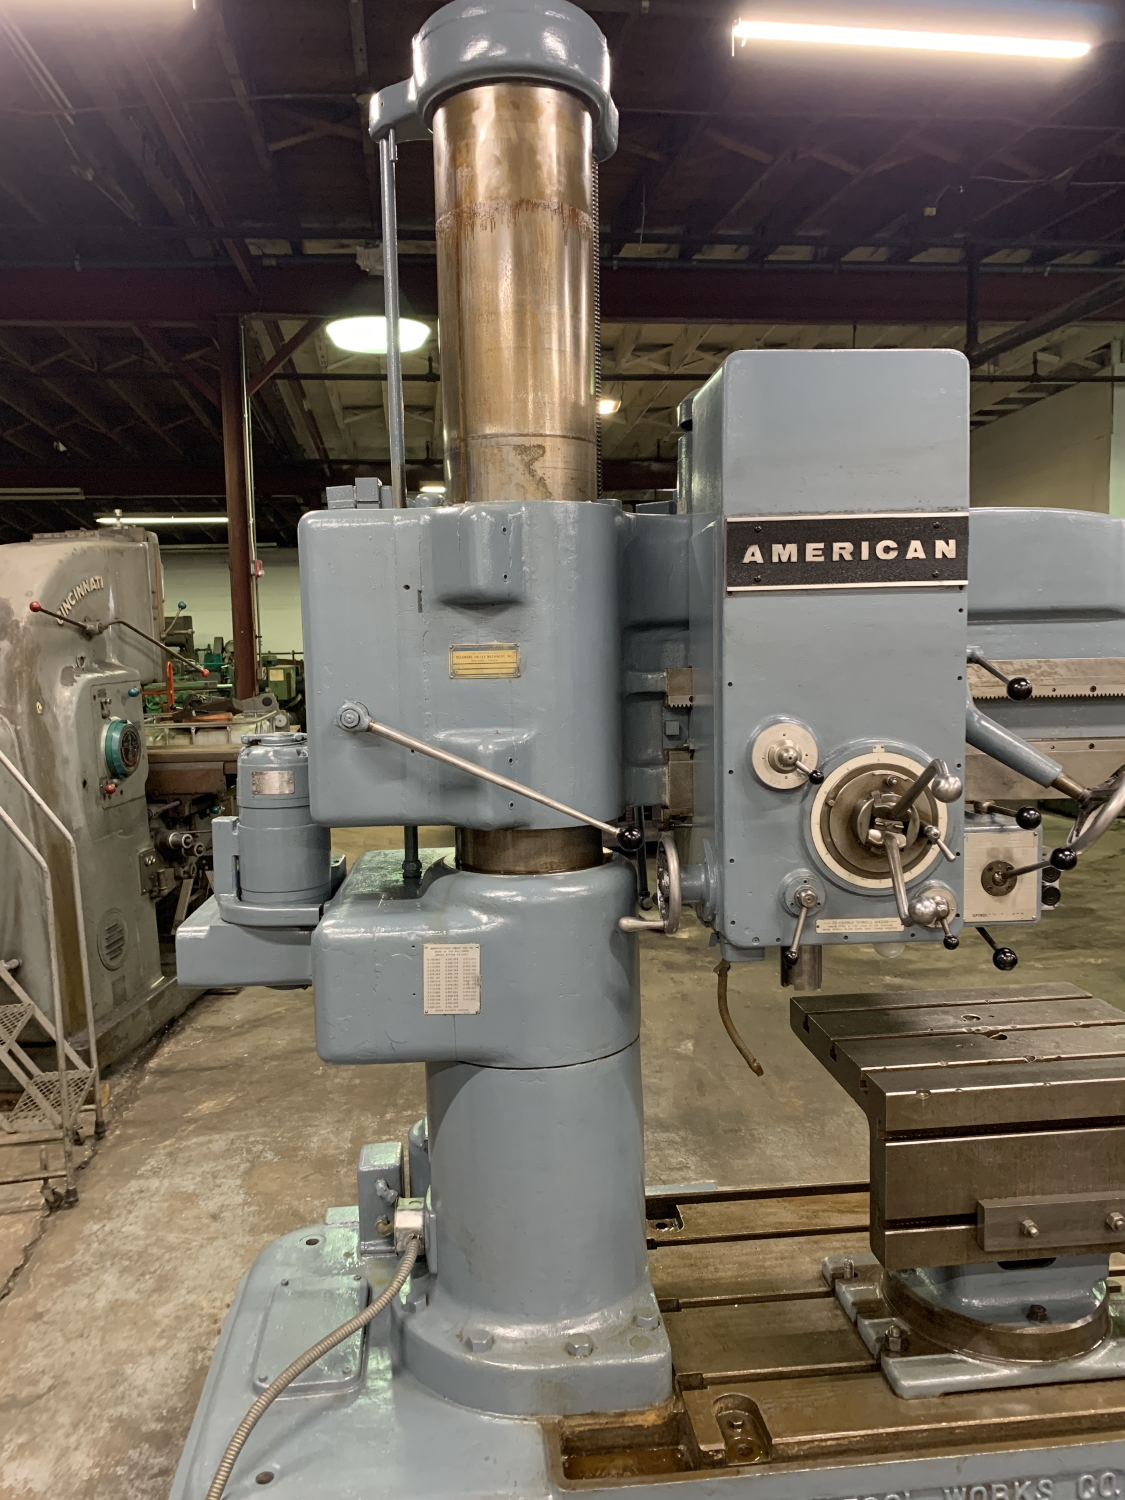 1965 AMERICAN TOOL WORKS 4' Radial Drill | RELCO MACHINERY